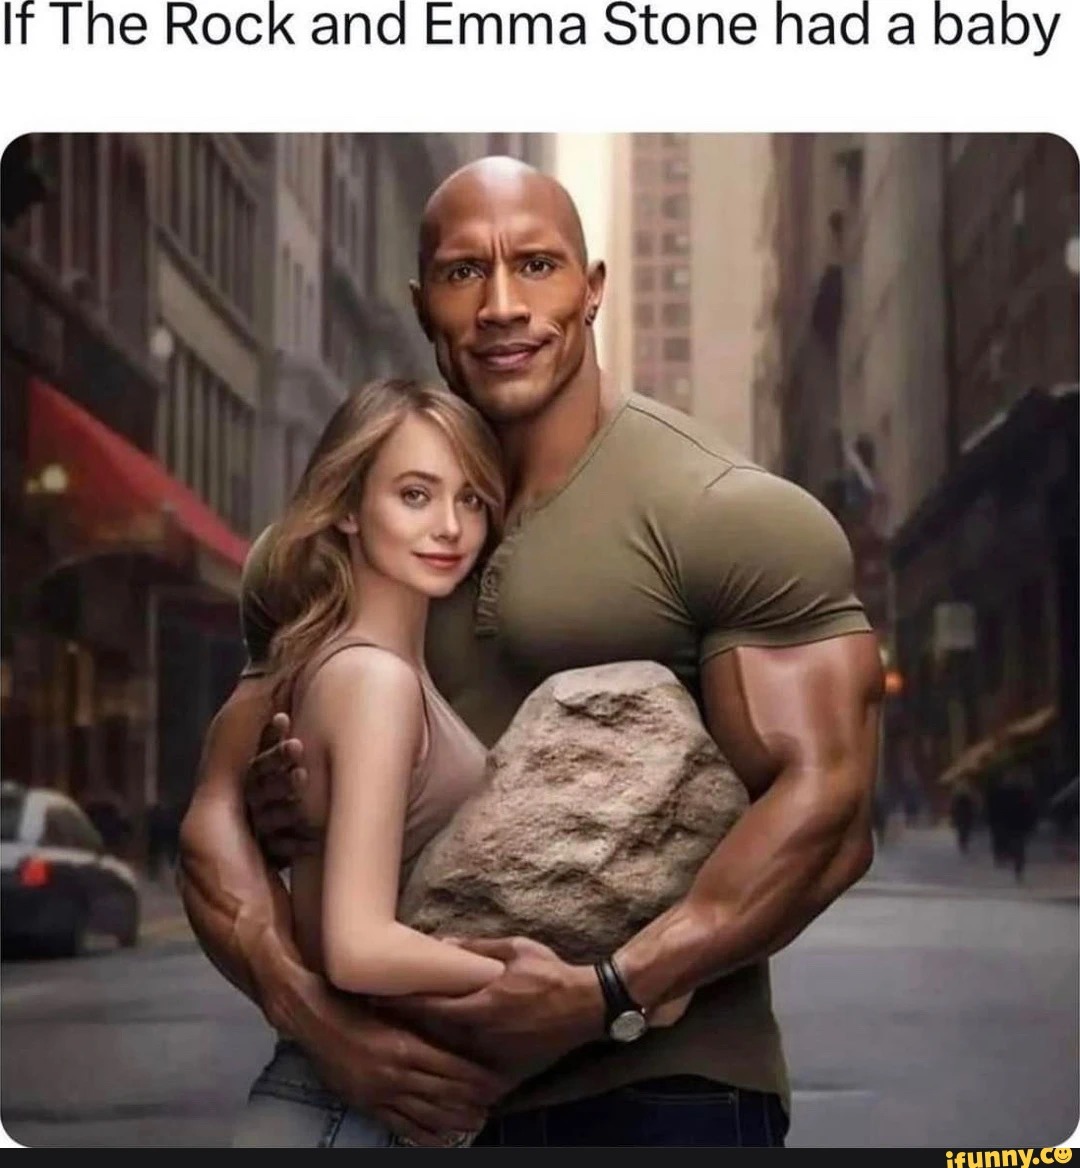 If The Rock and Emma Stone had a baby - meme